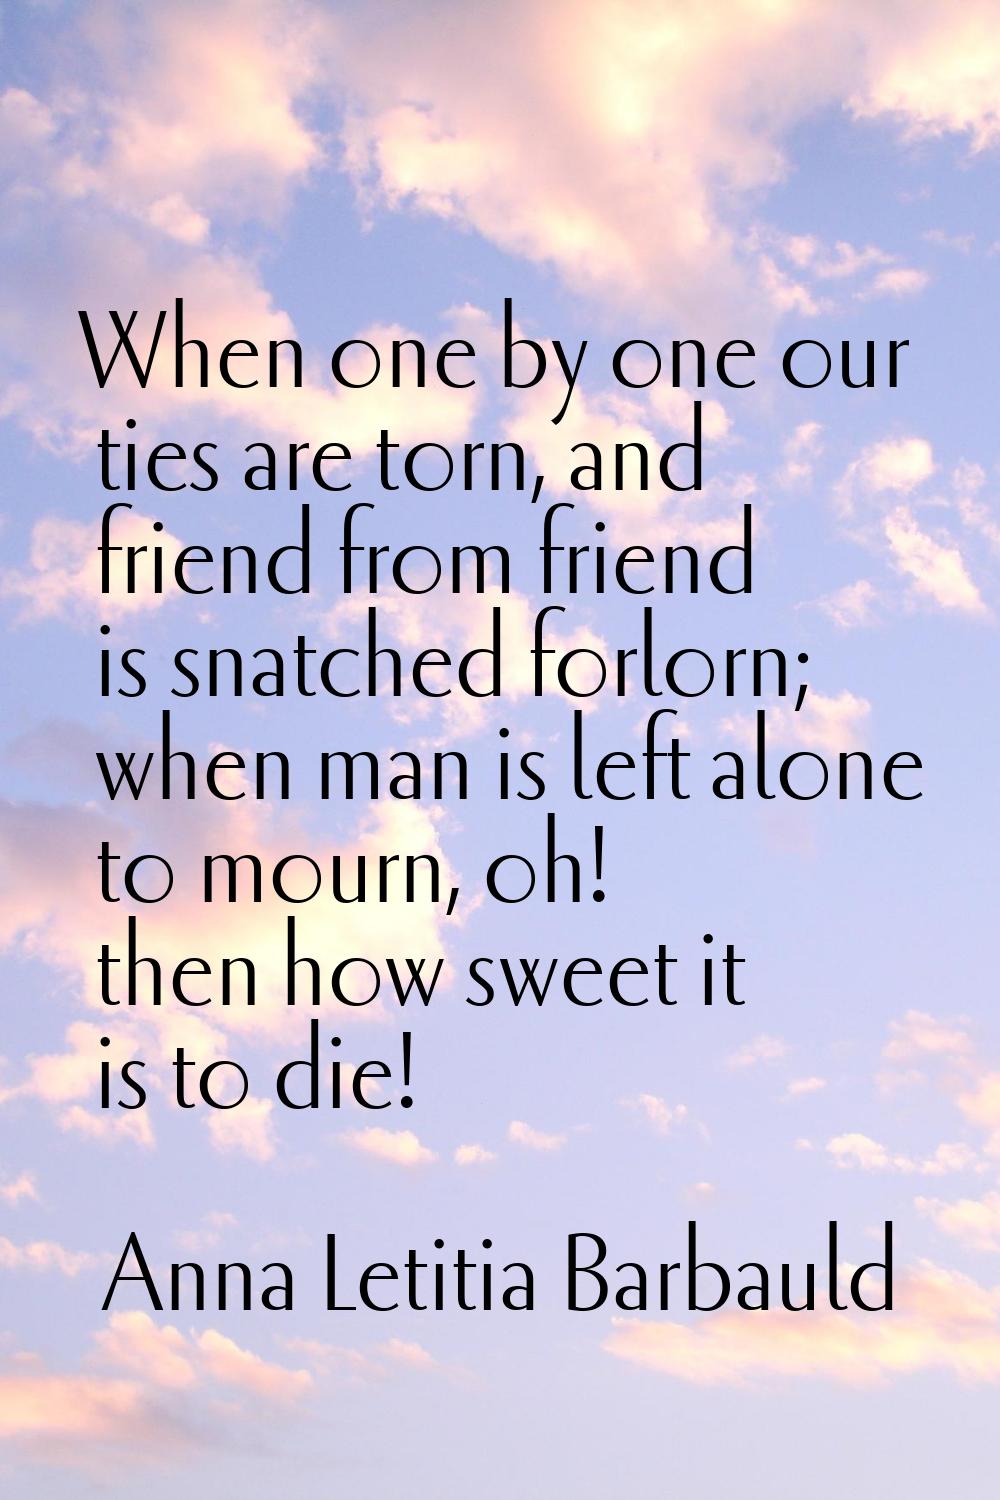 When one by one our ties are torn, and friend from friend is snatched forlorn; when man is left alo